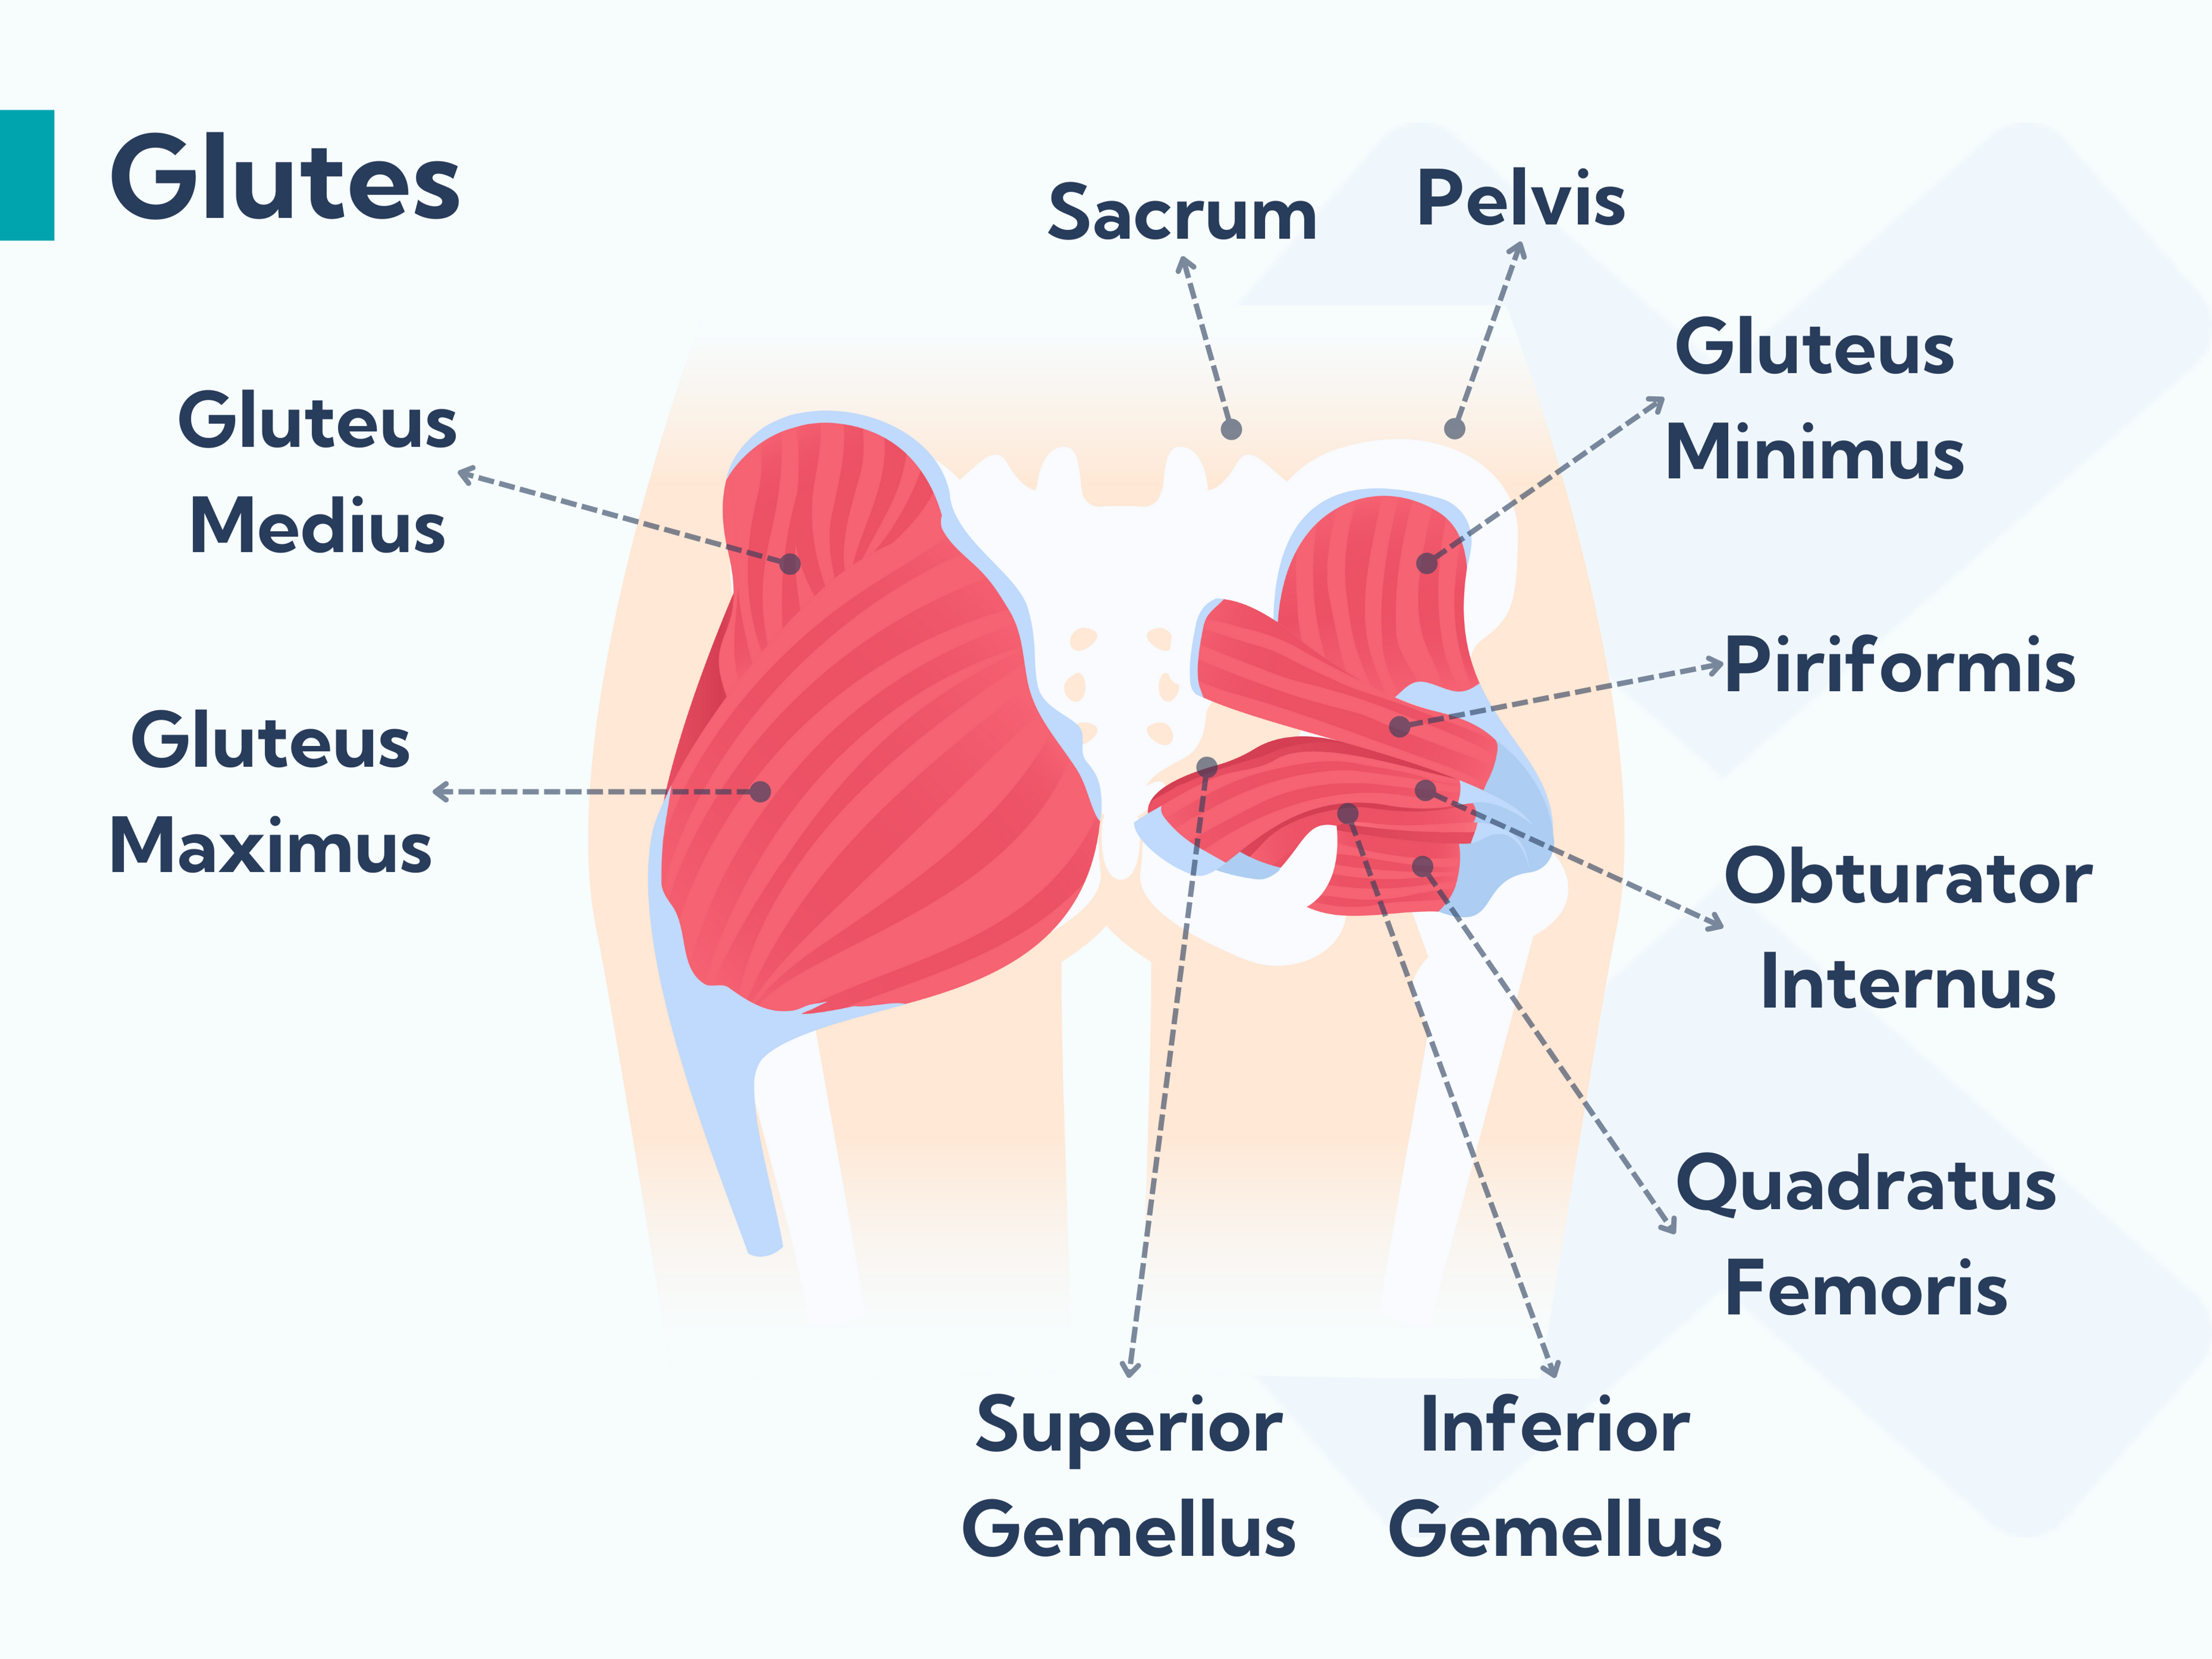 The glute medius and minimus tendons are the most commonly affected tendons in gluteal tendinopathy